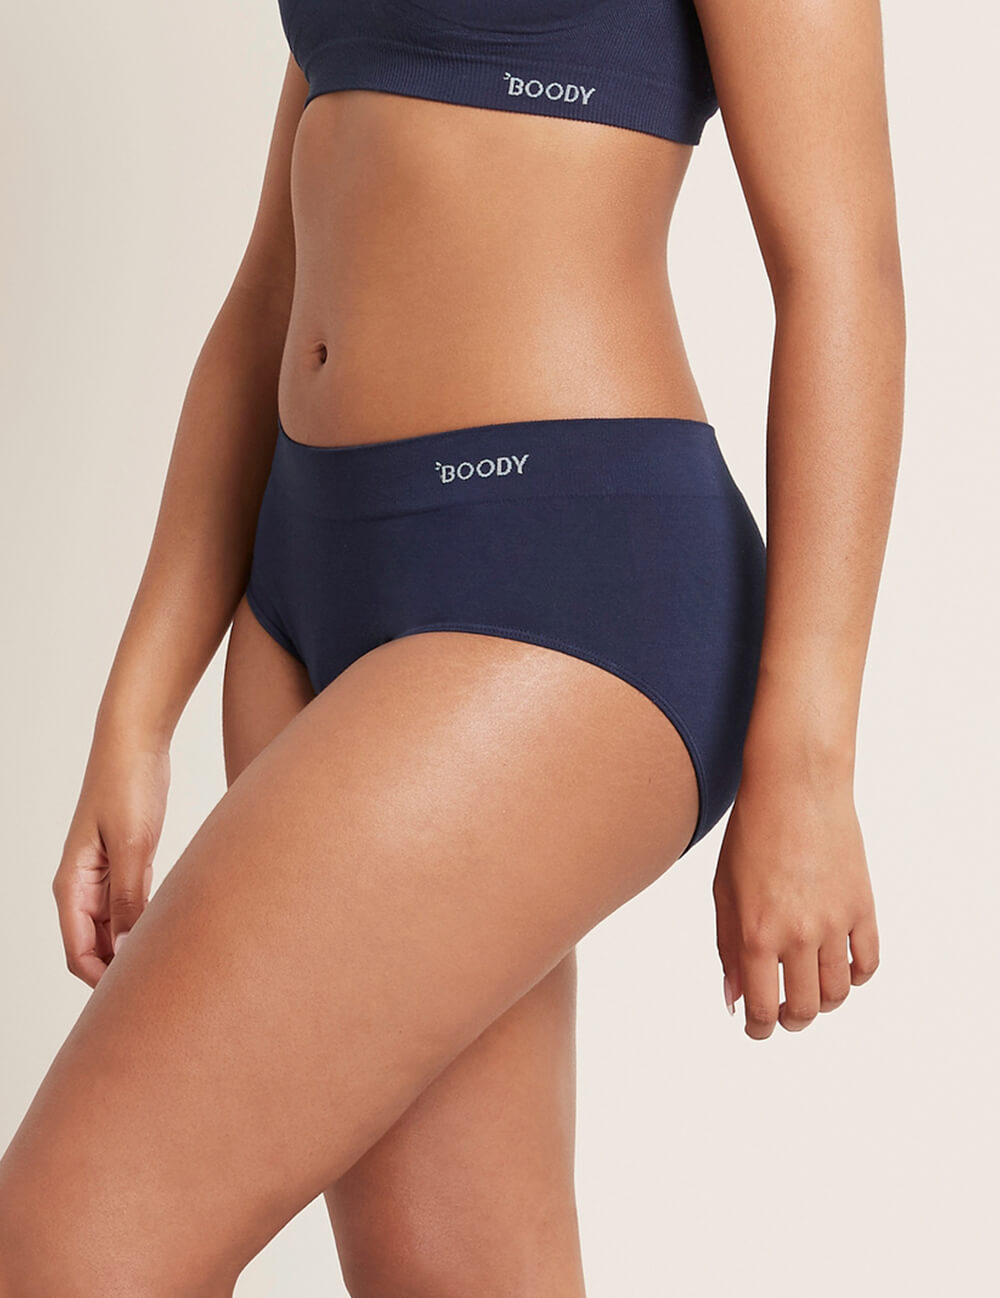 Boody Bamboo Midi Brief Full Coverage Womens Underwear in Navy Blue Side View